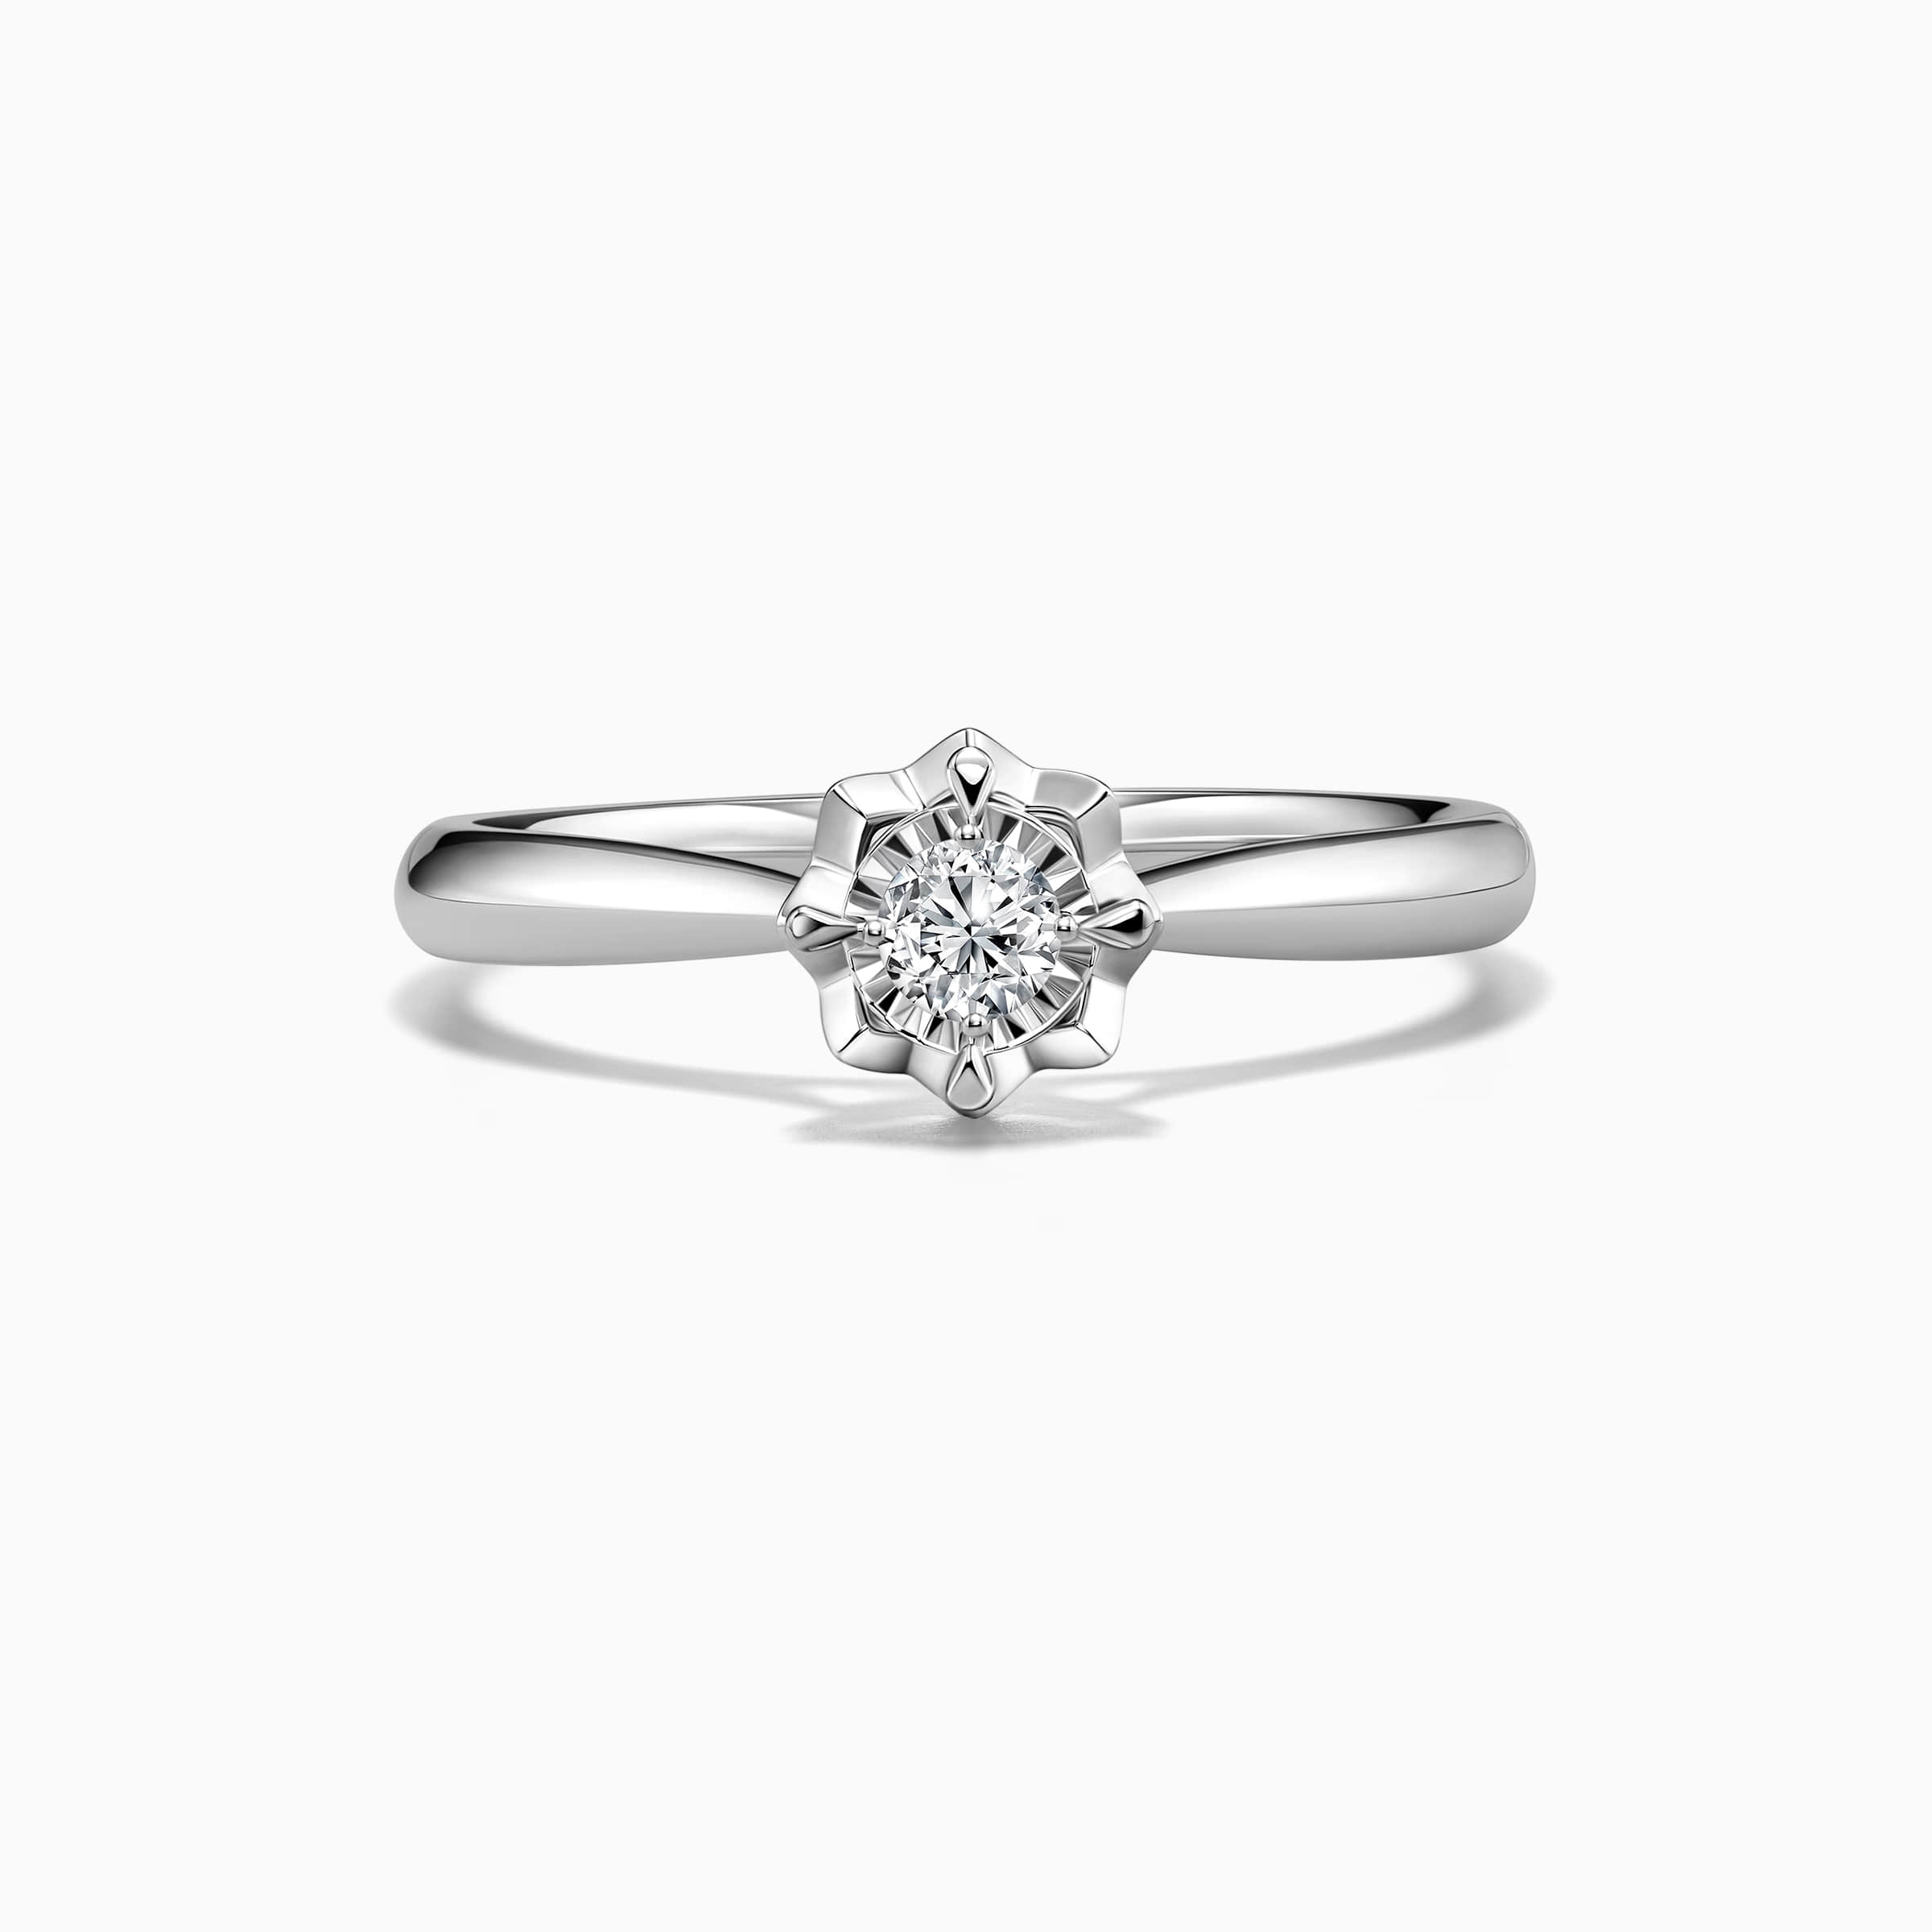 Darry Ring flower promise ring front view